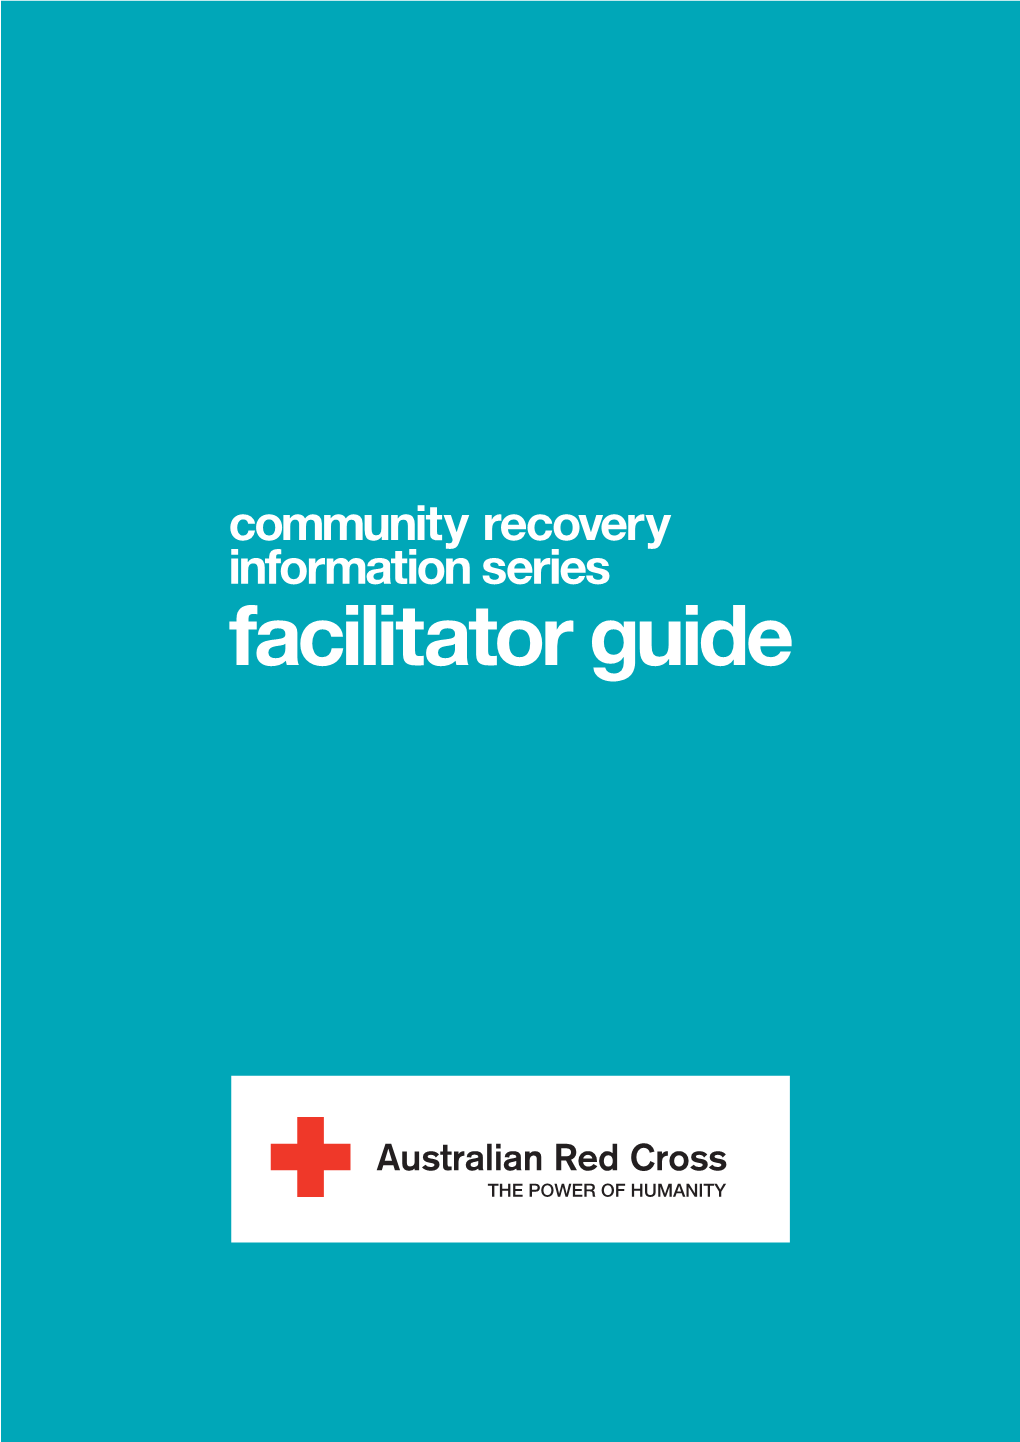 Red Cross Community Recovery Information Series Facilitator Guide